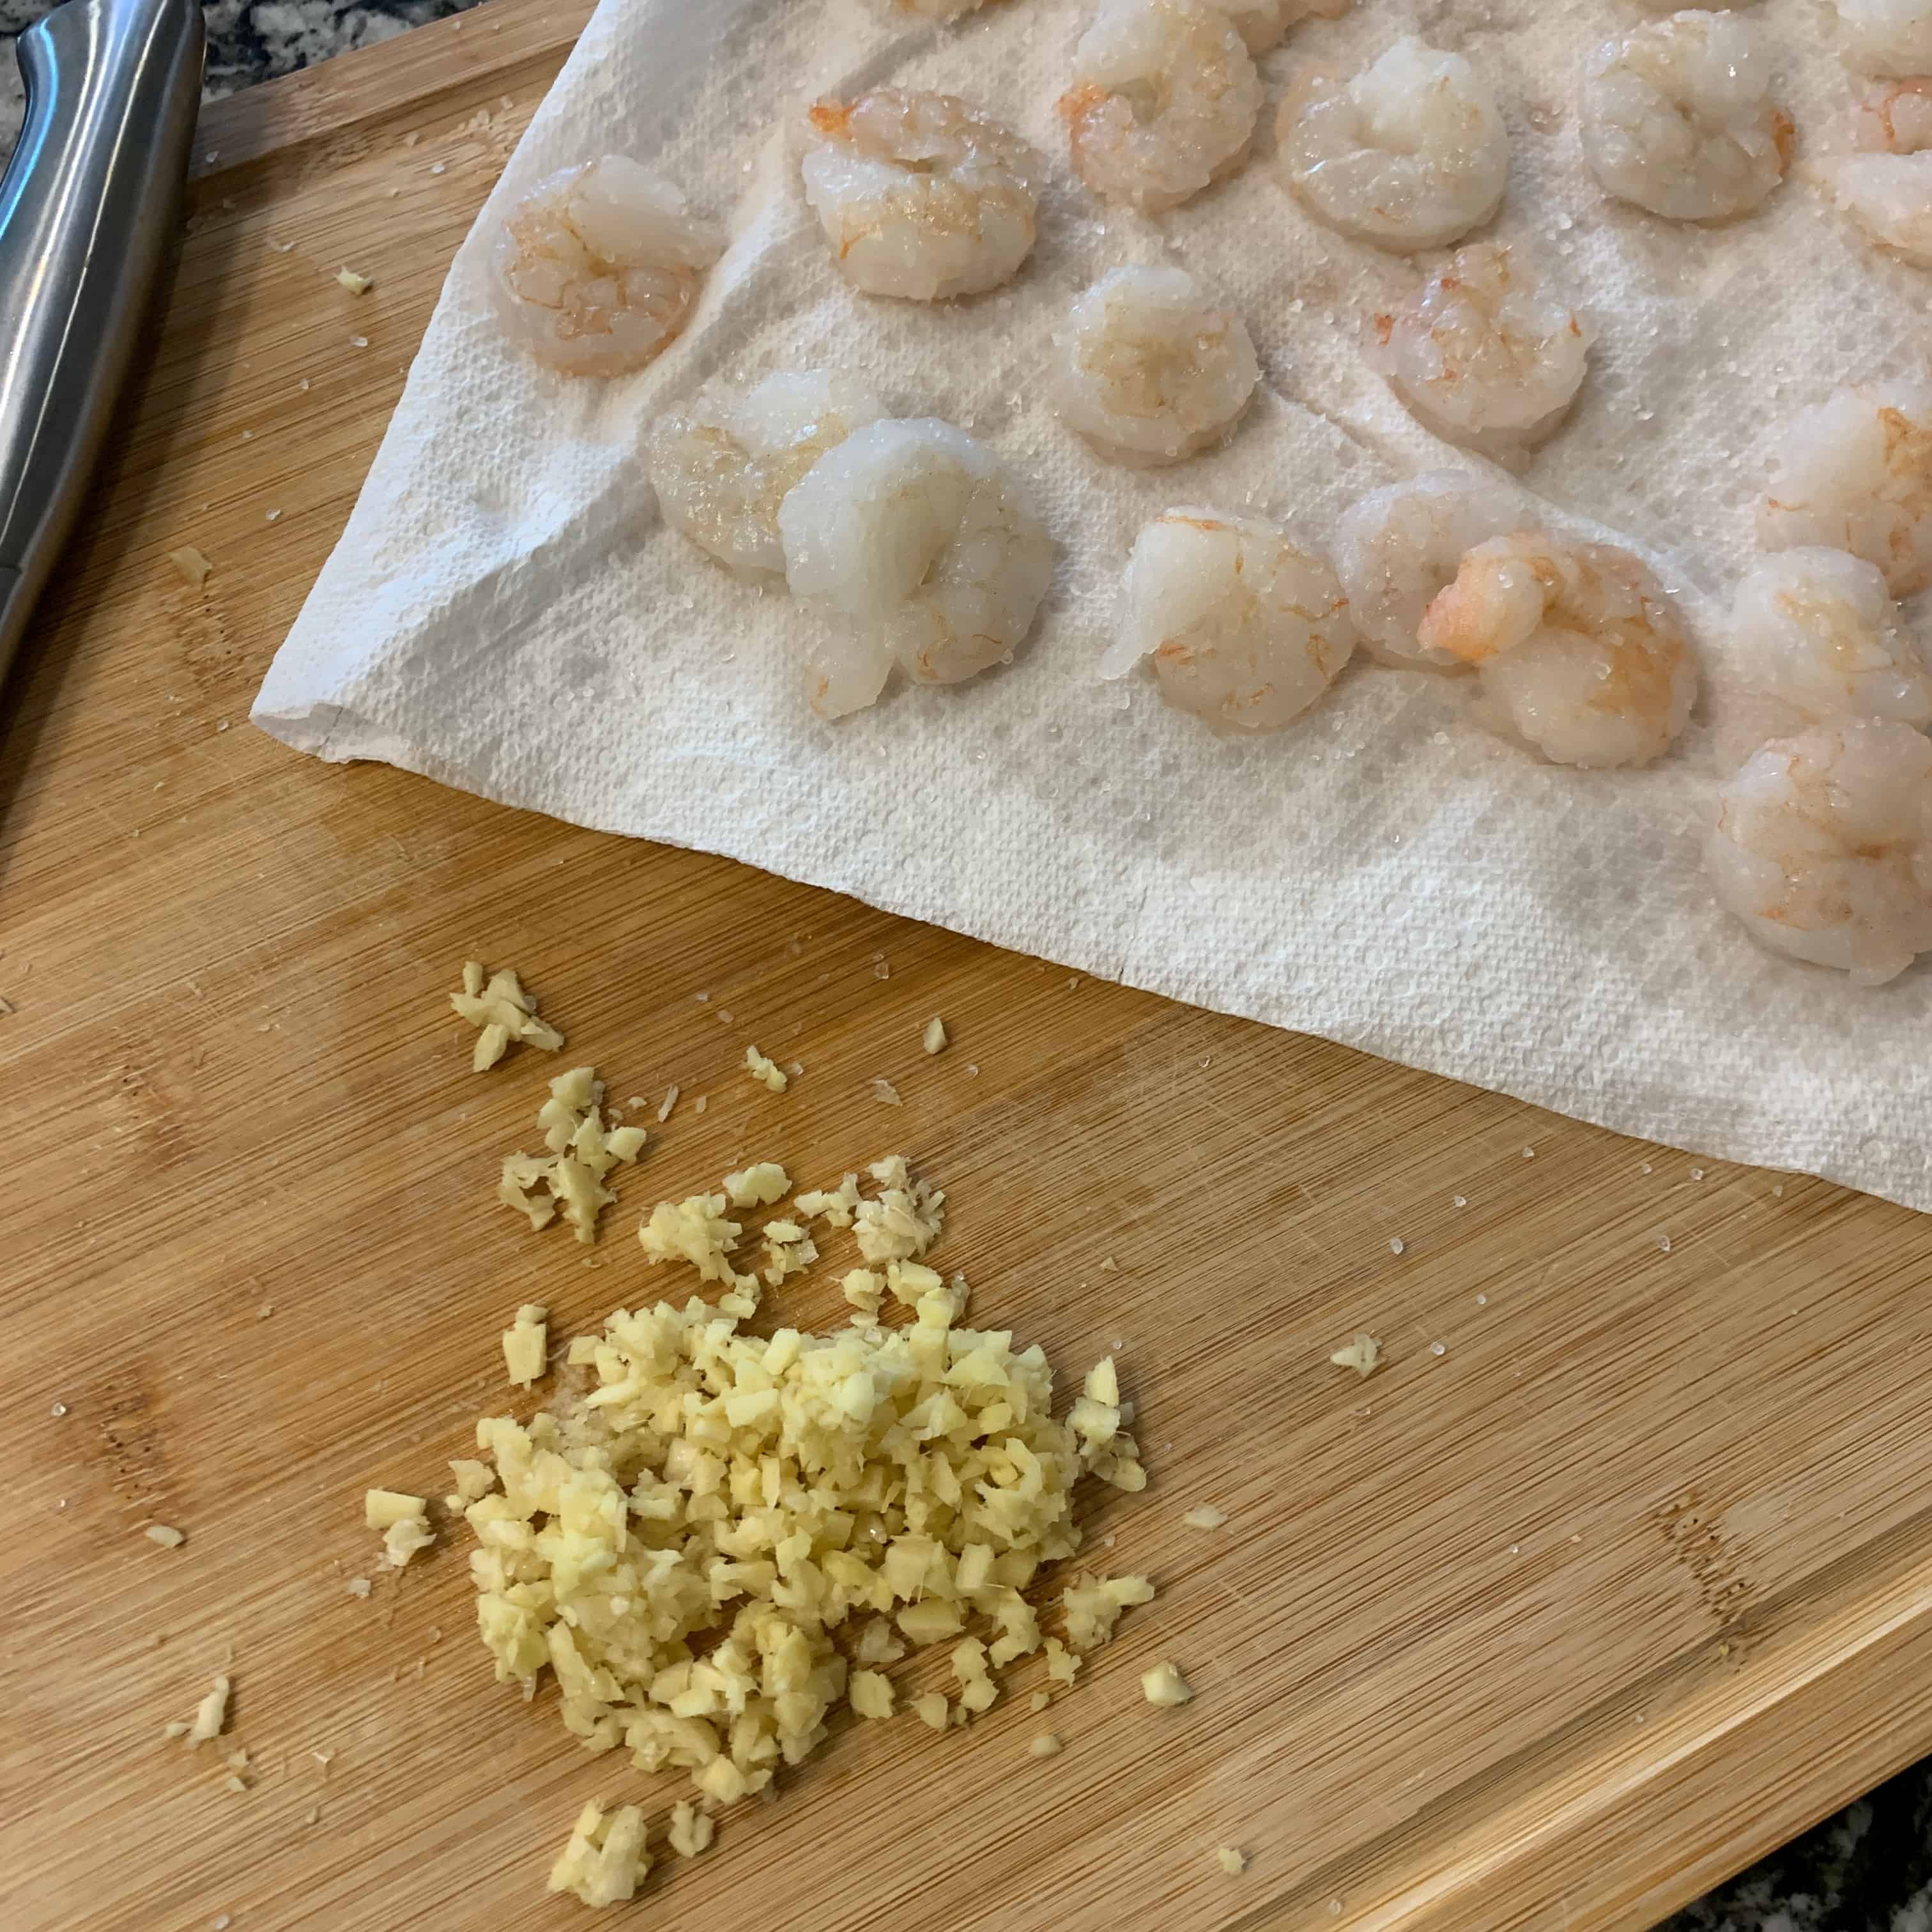 minced garlic and ginger next to thawed shrimp